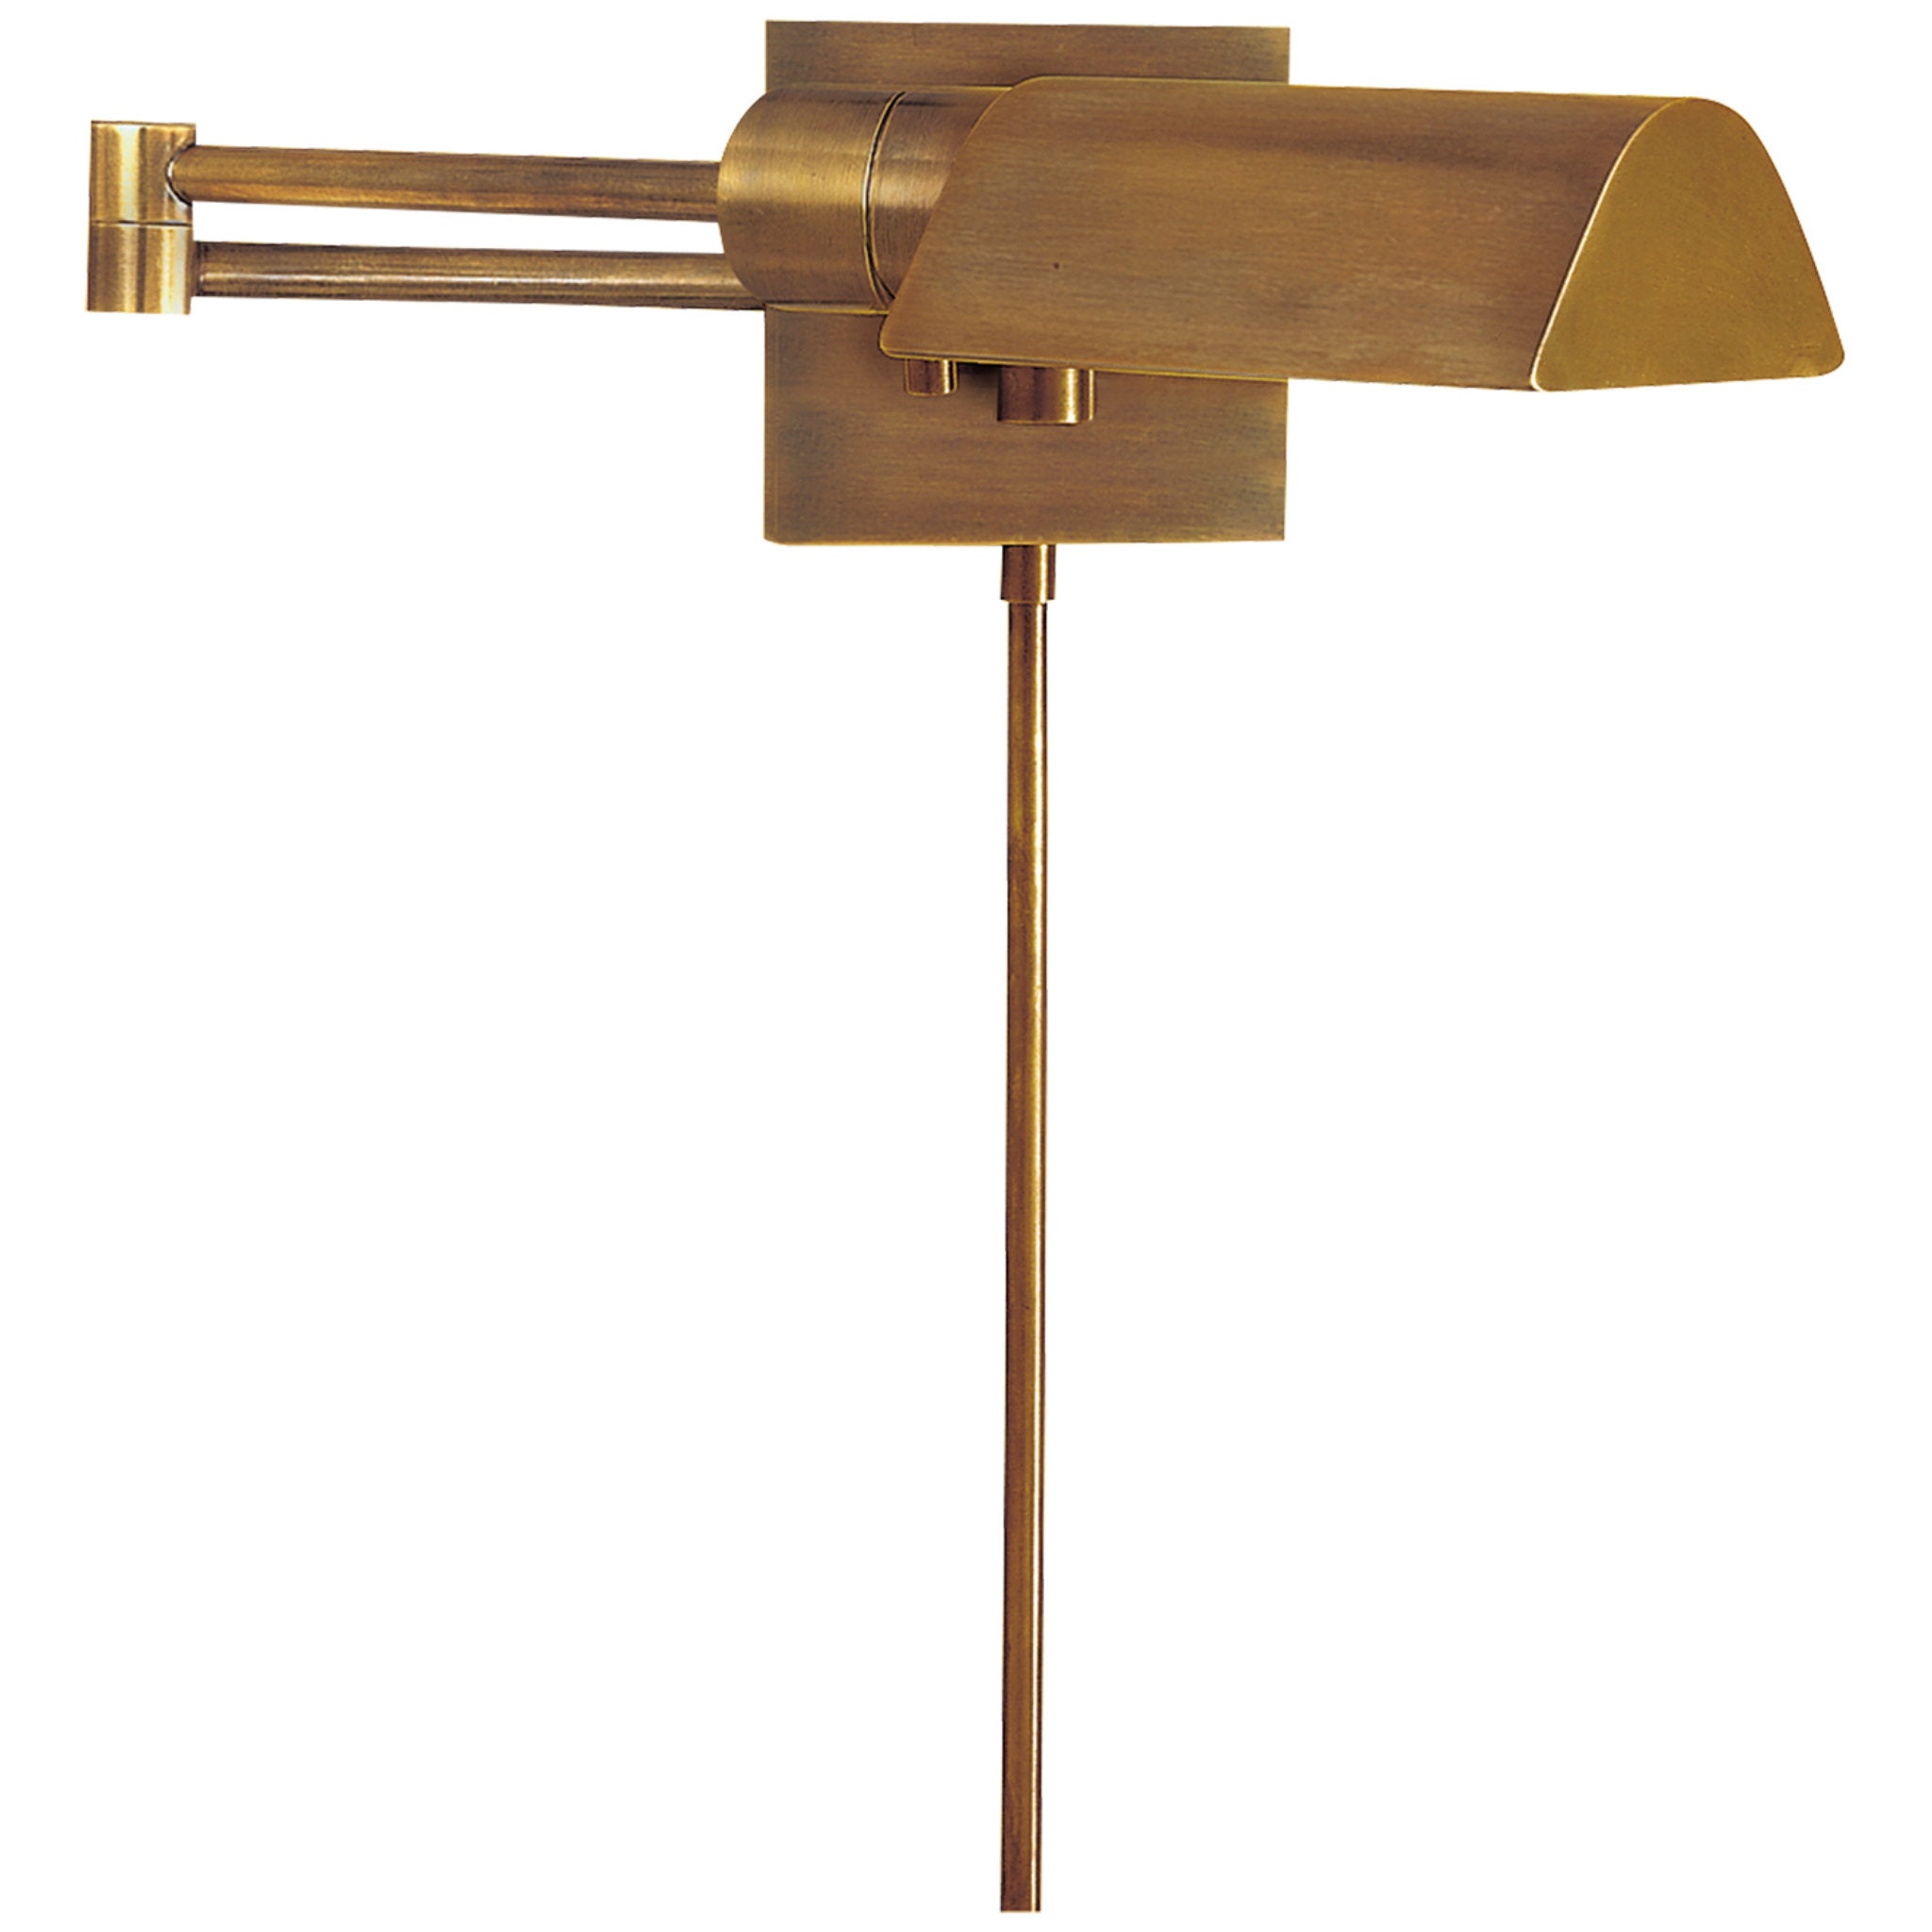 Visual Comfort Studio Swing Arm Wall Light in Hand-Rubbed Antique Brass